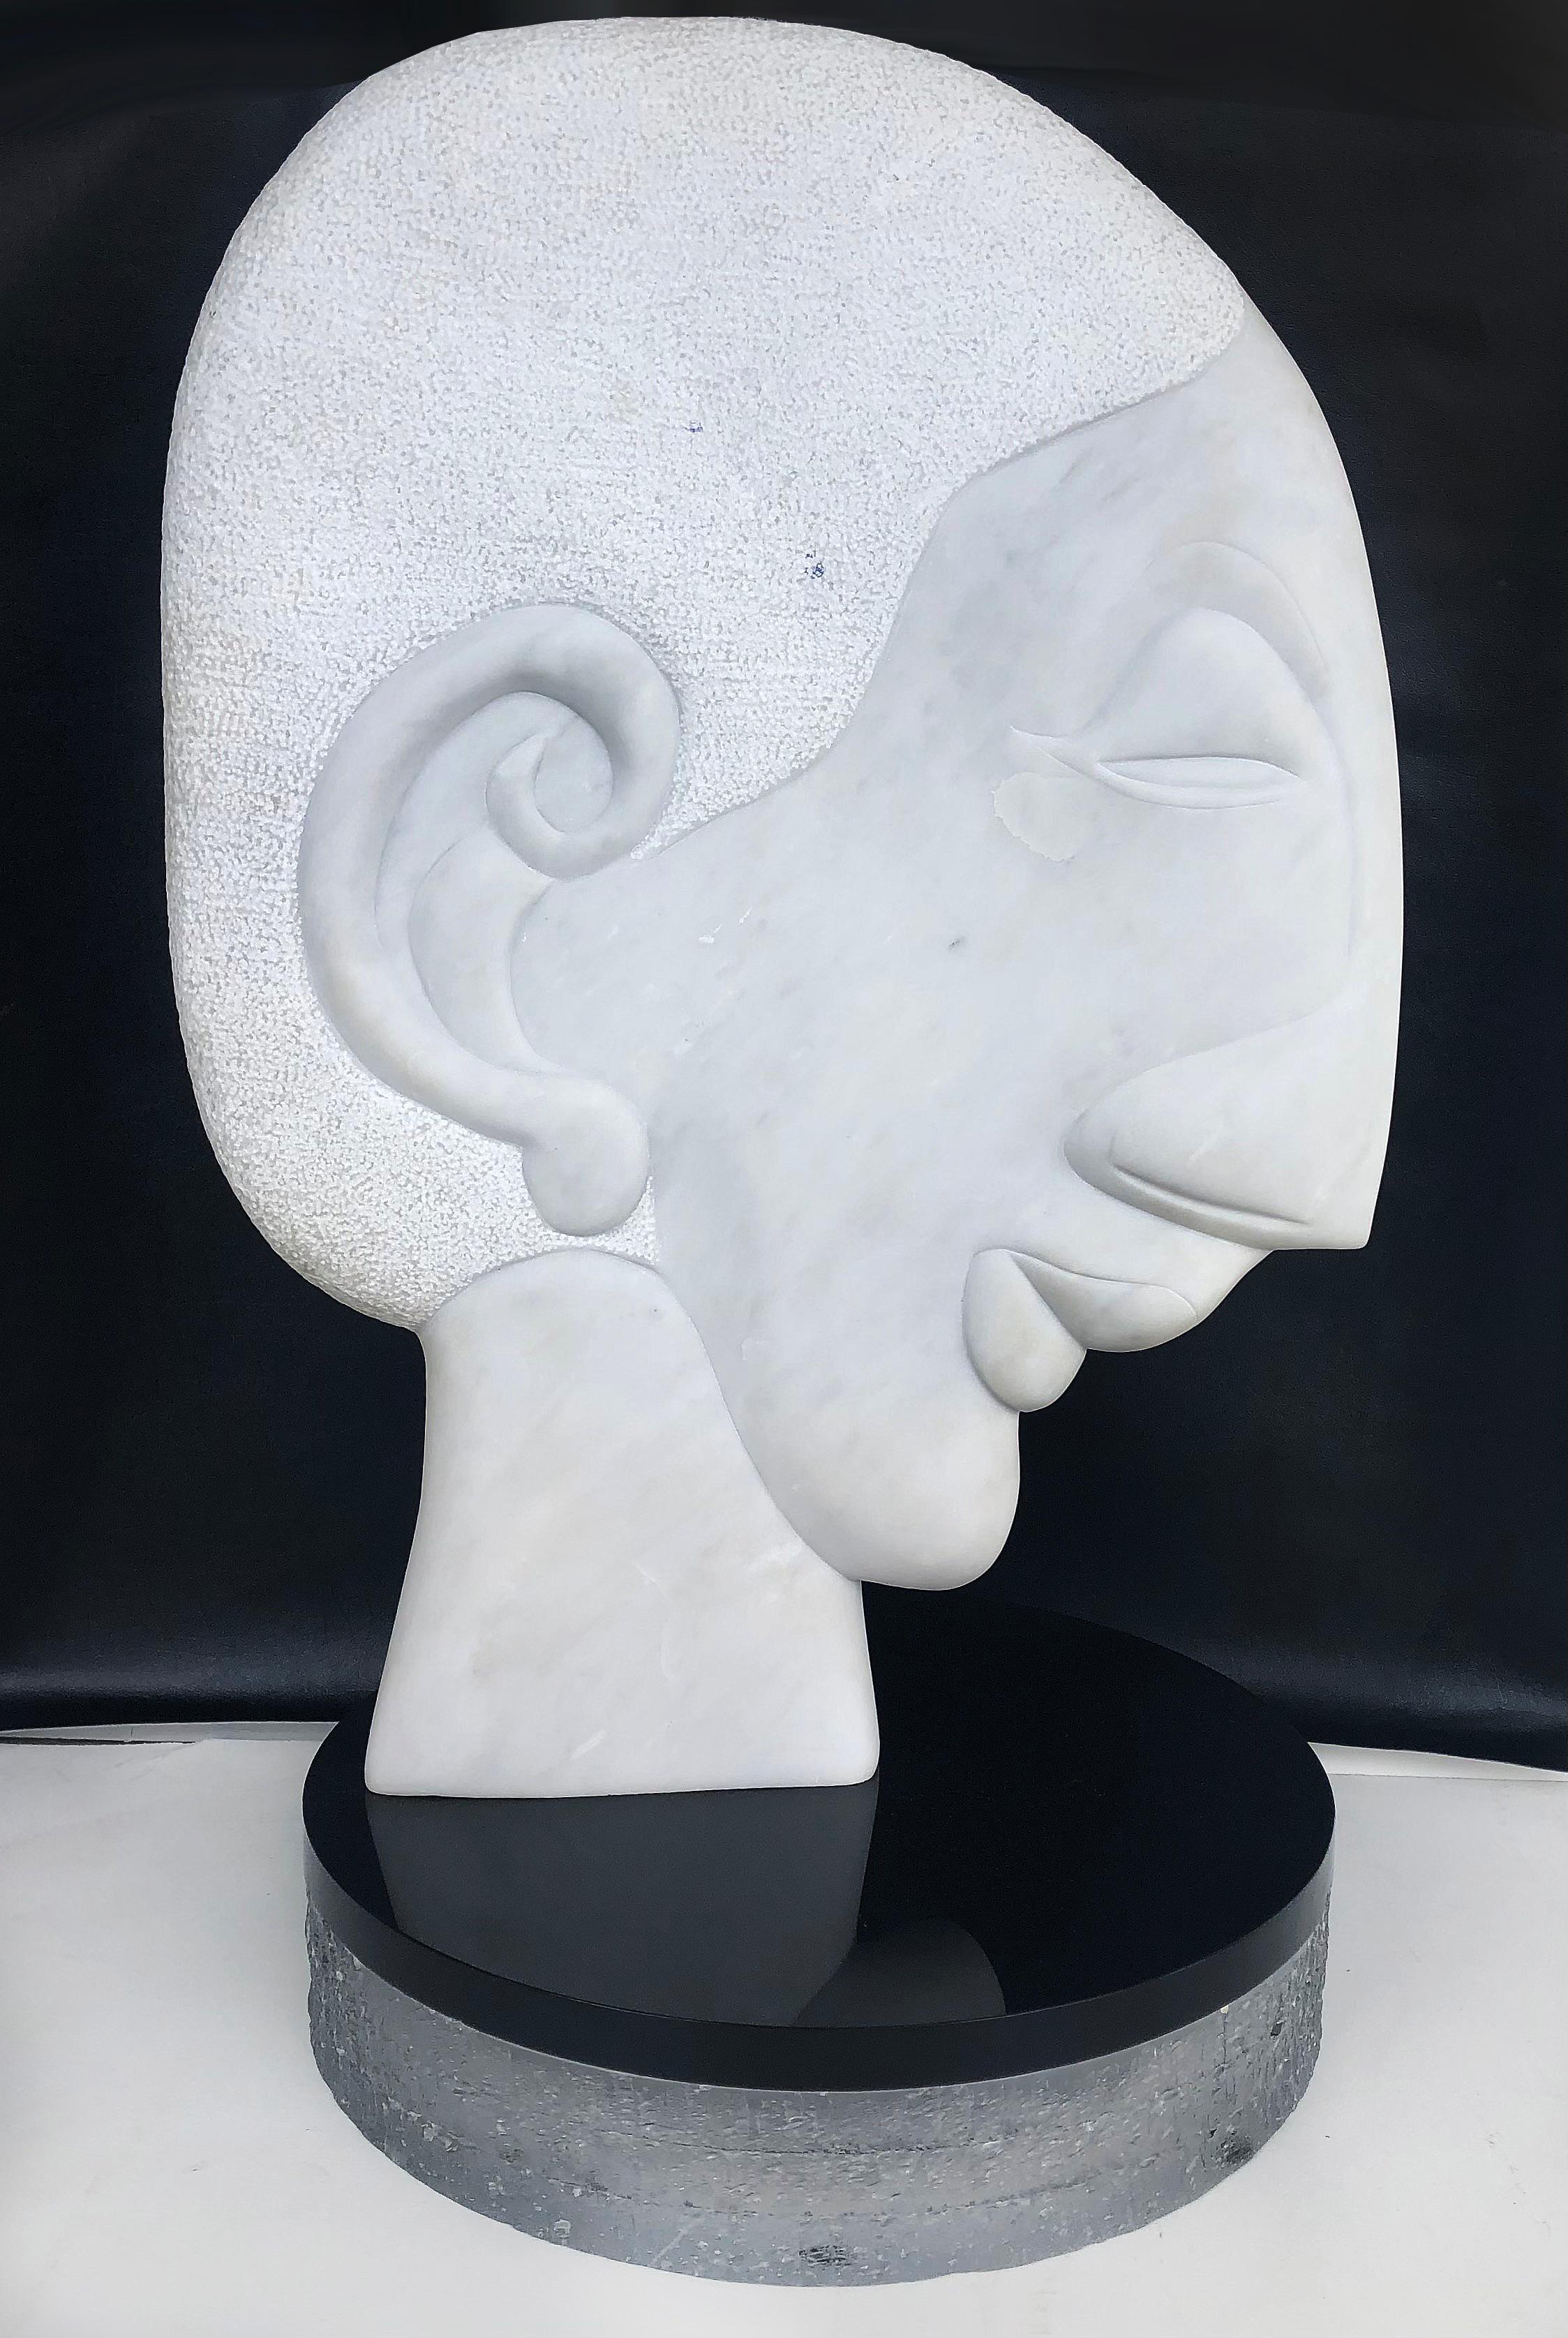 Vintage William P. Katz Abstract Carved Marble Sculpture Signed WPK 

Offered for sale is an original abstract carved marble sculpture thought to be a self-portrait by American artist William P. Katz (1936-2003). The sculpture features the title